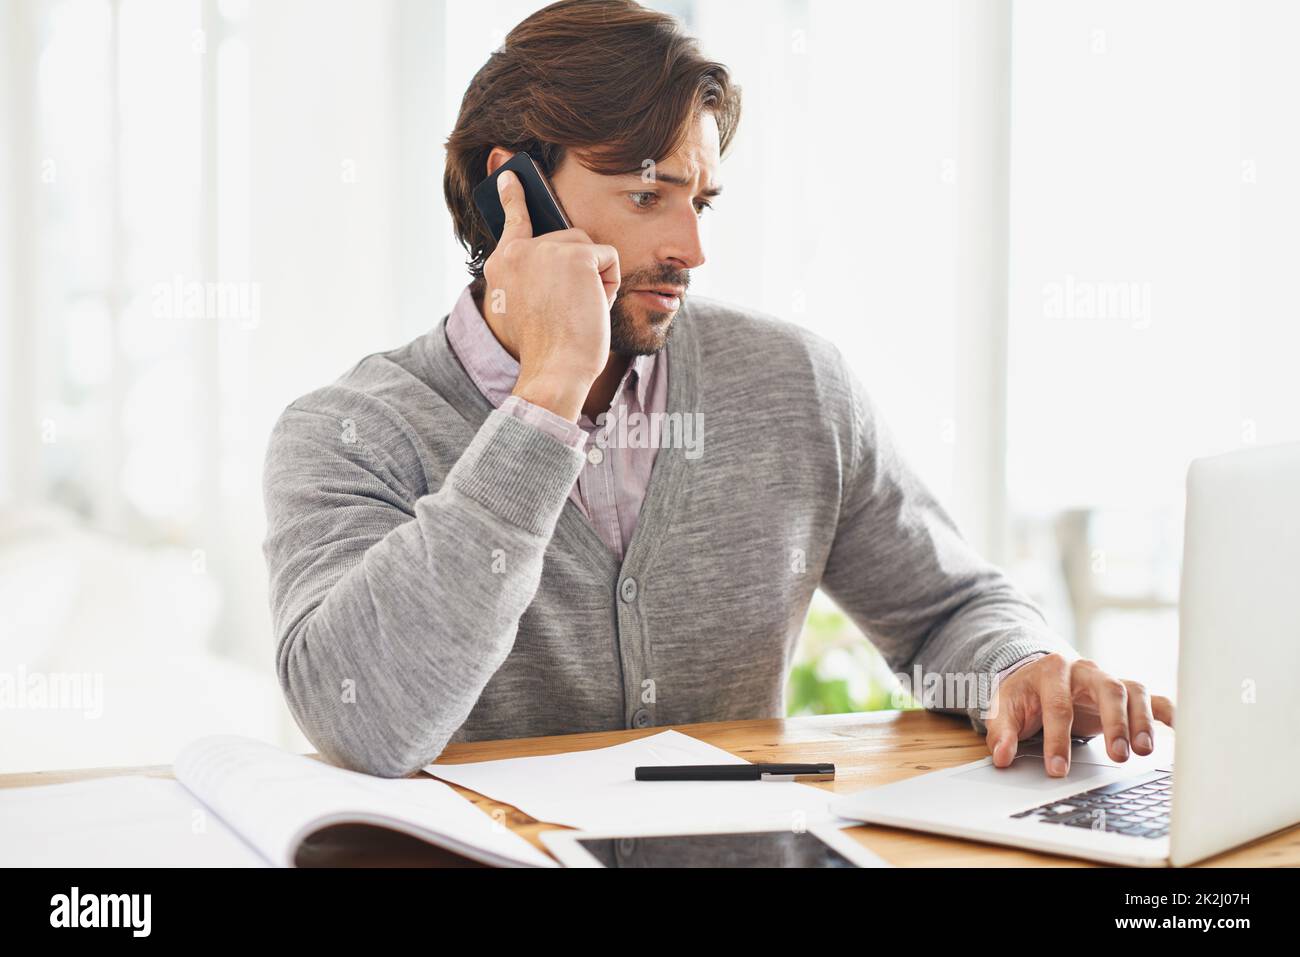 Connected to the world. A handsome businessman speaking on his mobile at his desk. Stock Photo